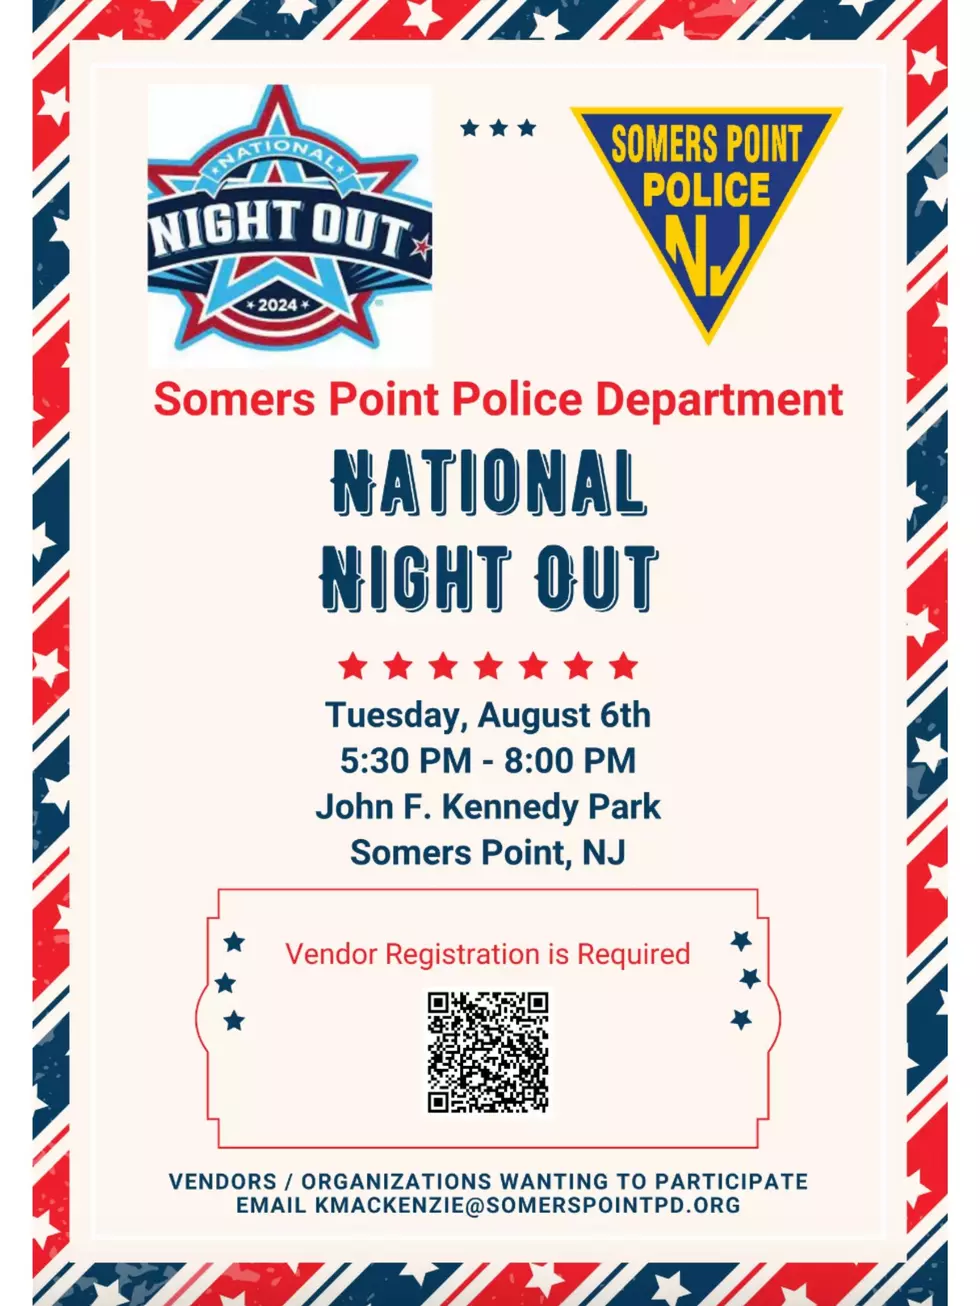 Somers Point Police Department National Night Out